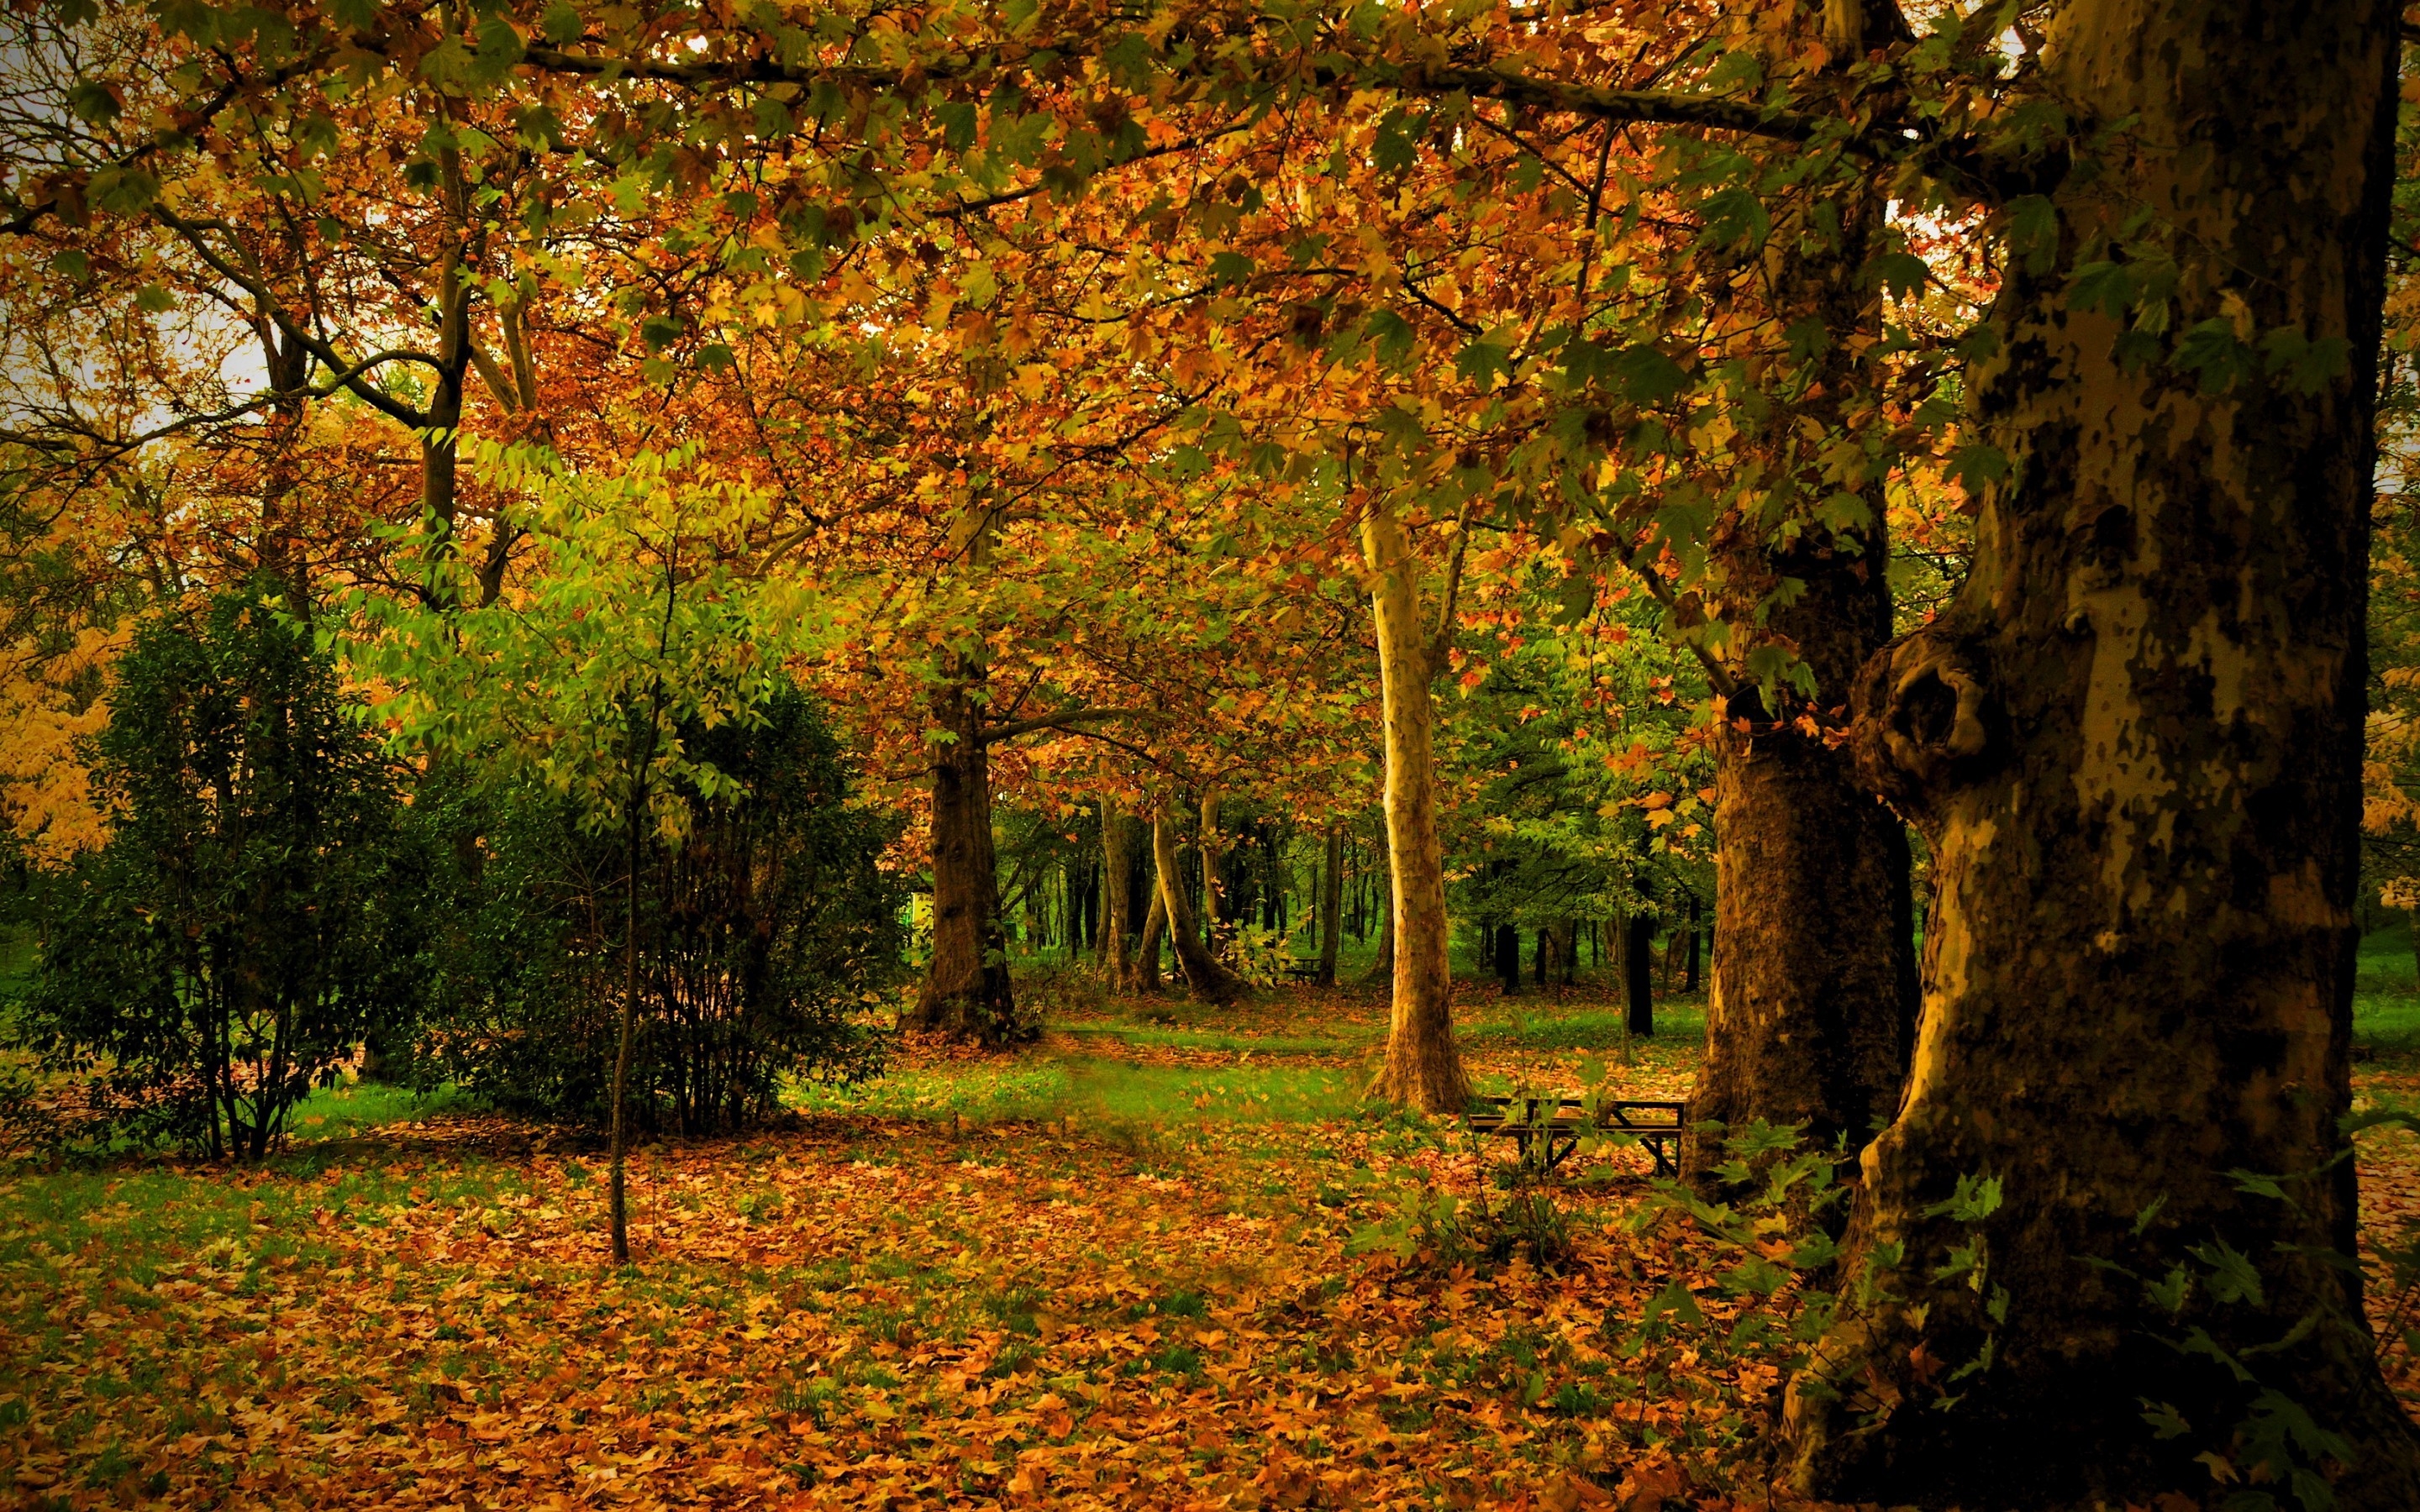 Just Autumn Time for 2880 x 1800 Retina Display resolution